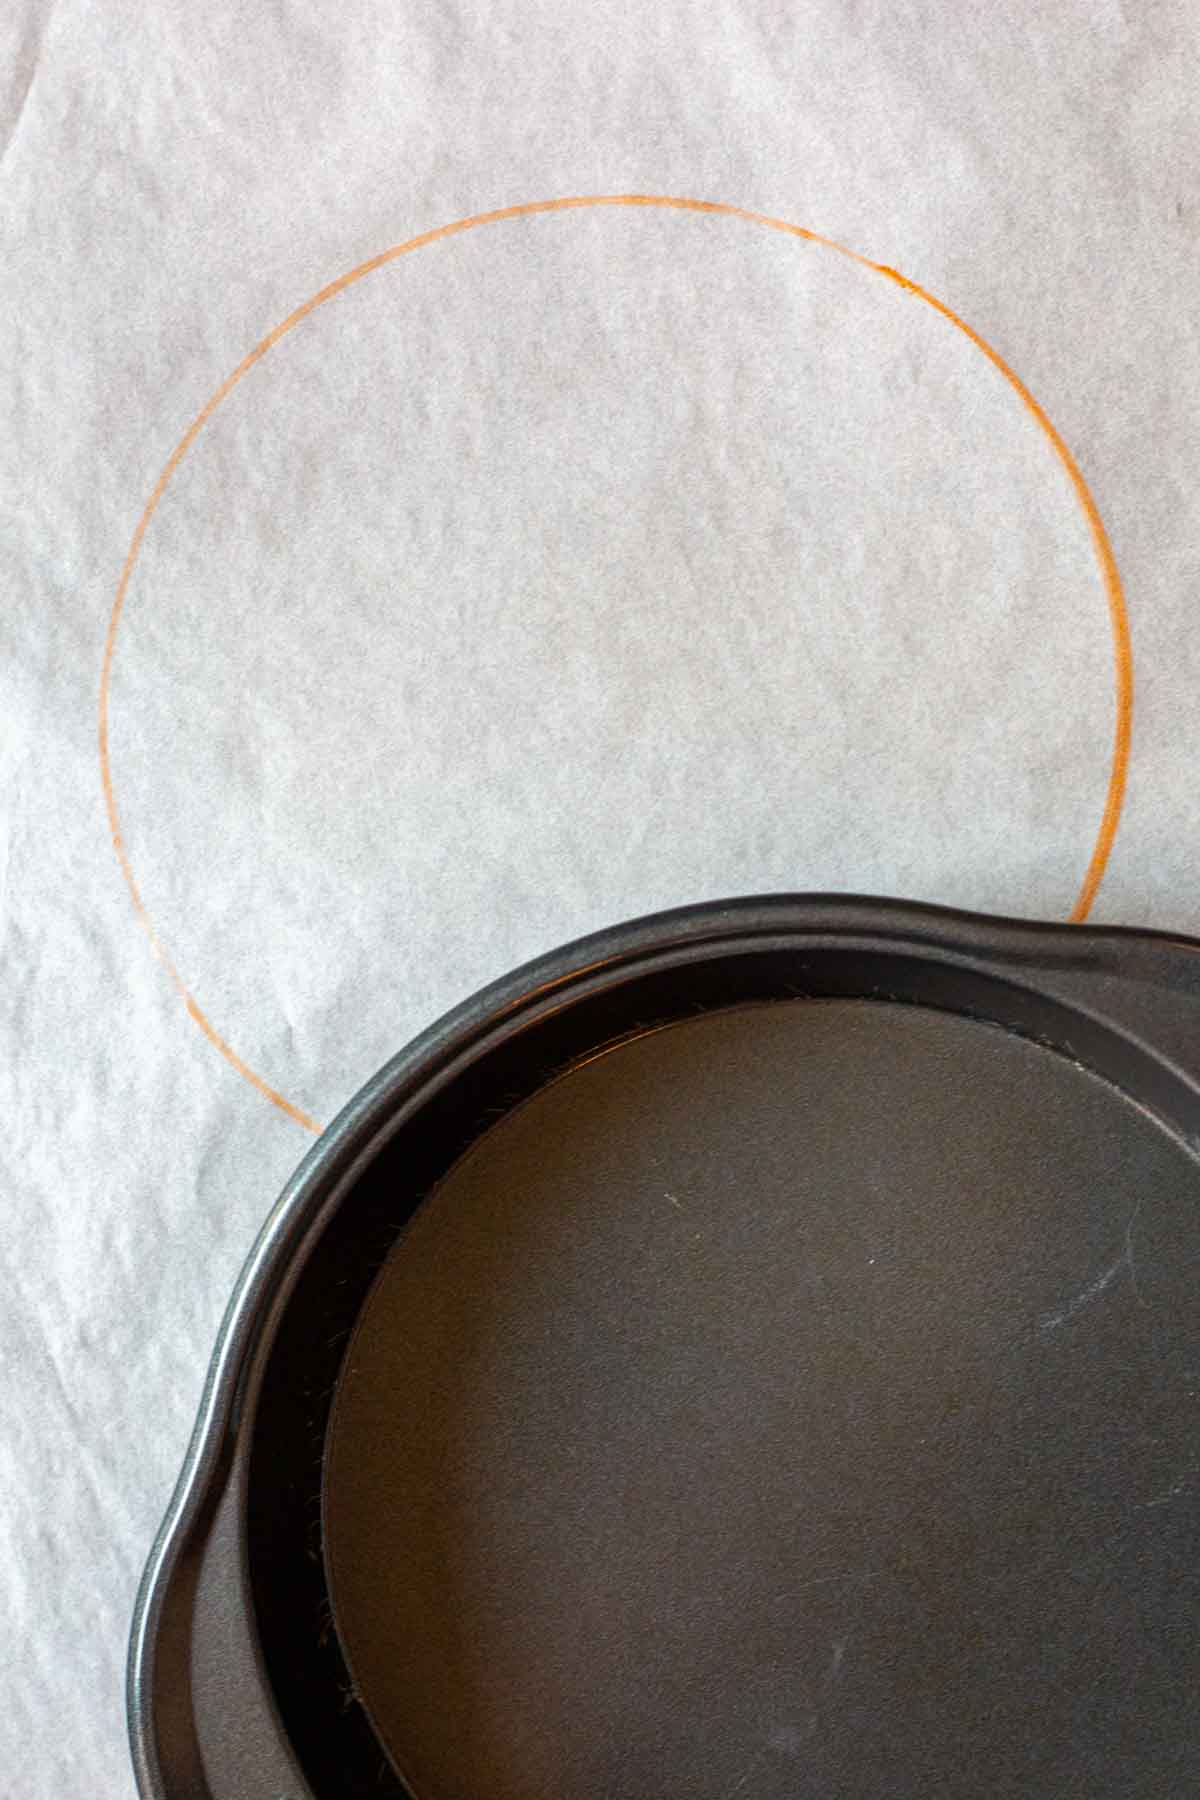 How to mark parchment paper to cut and fit in a cake pan.